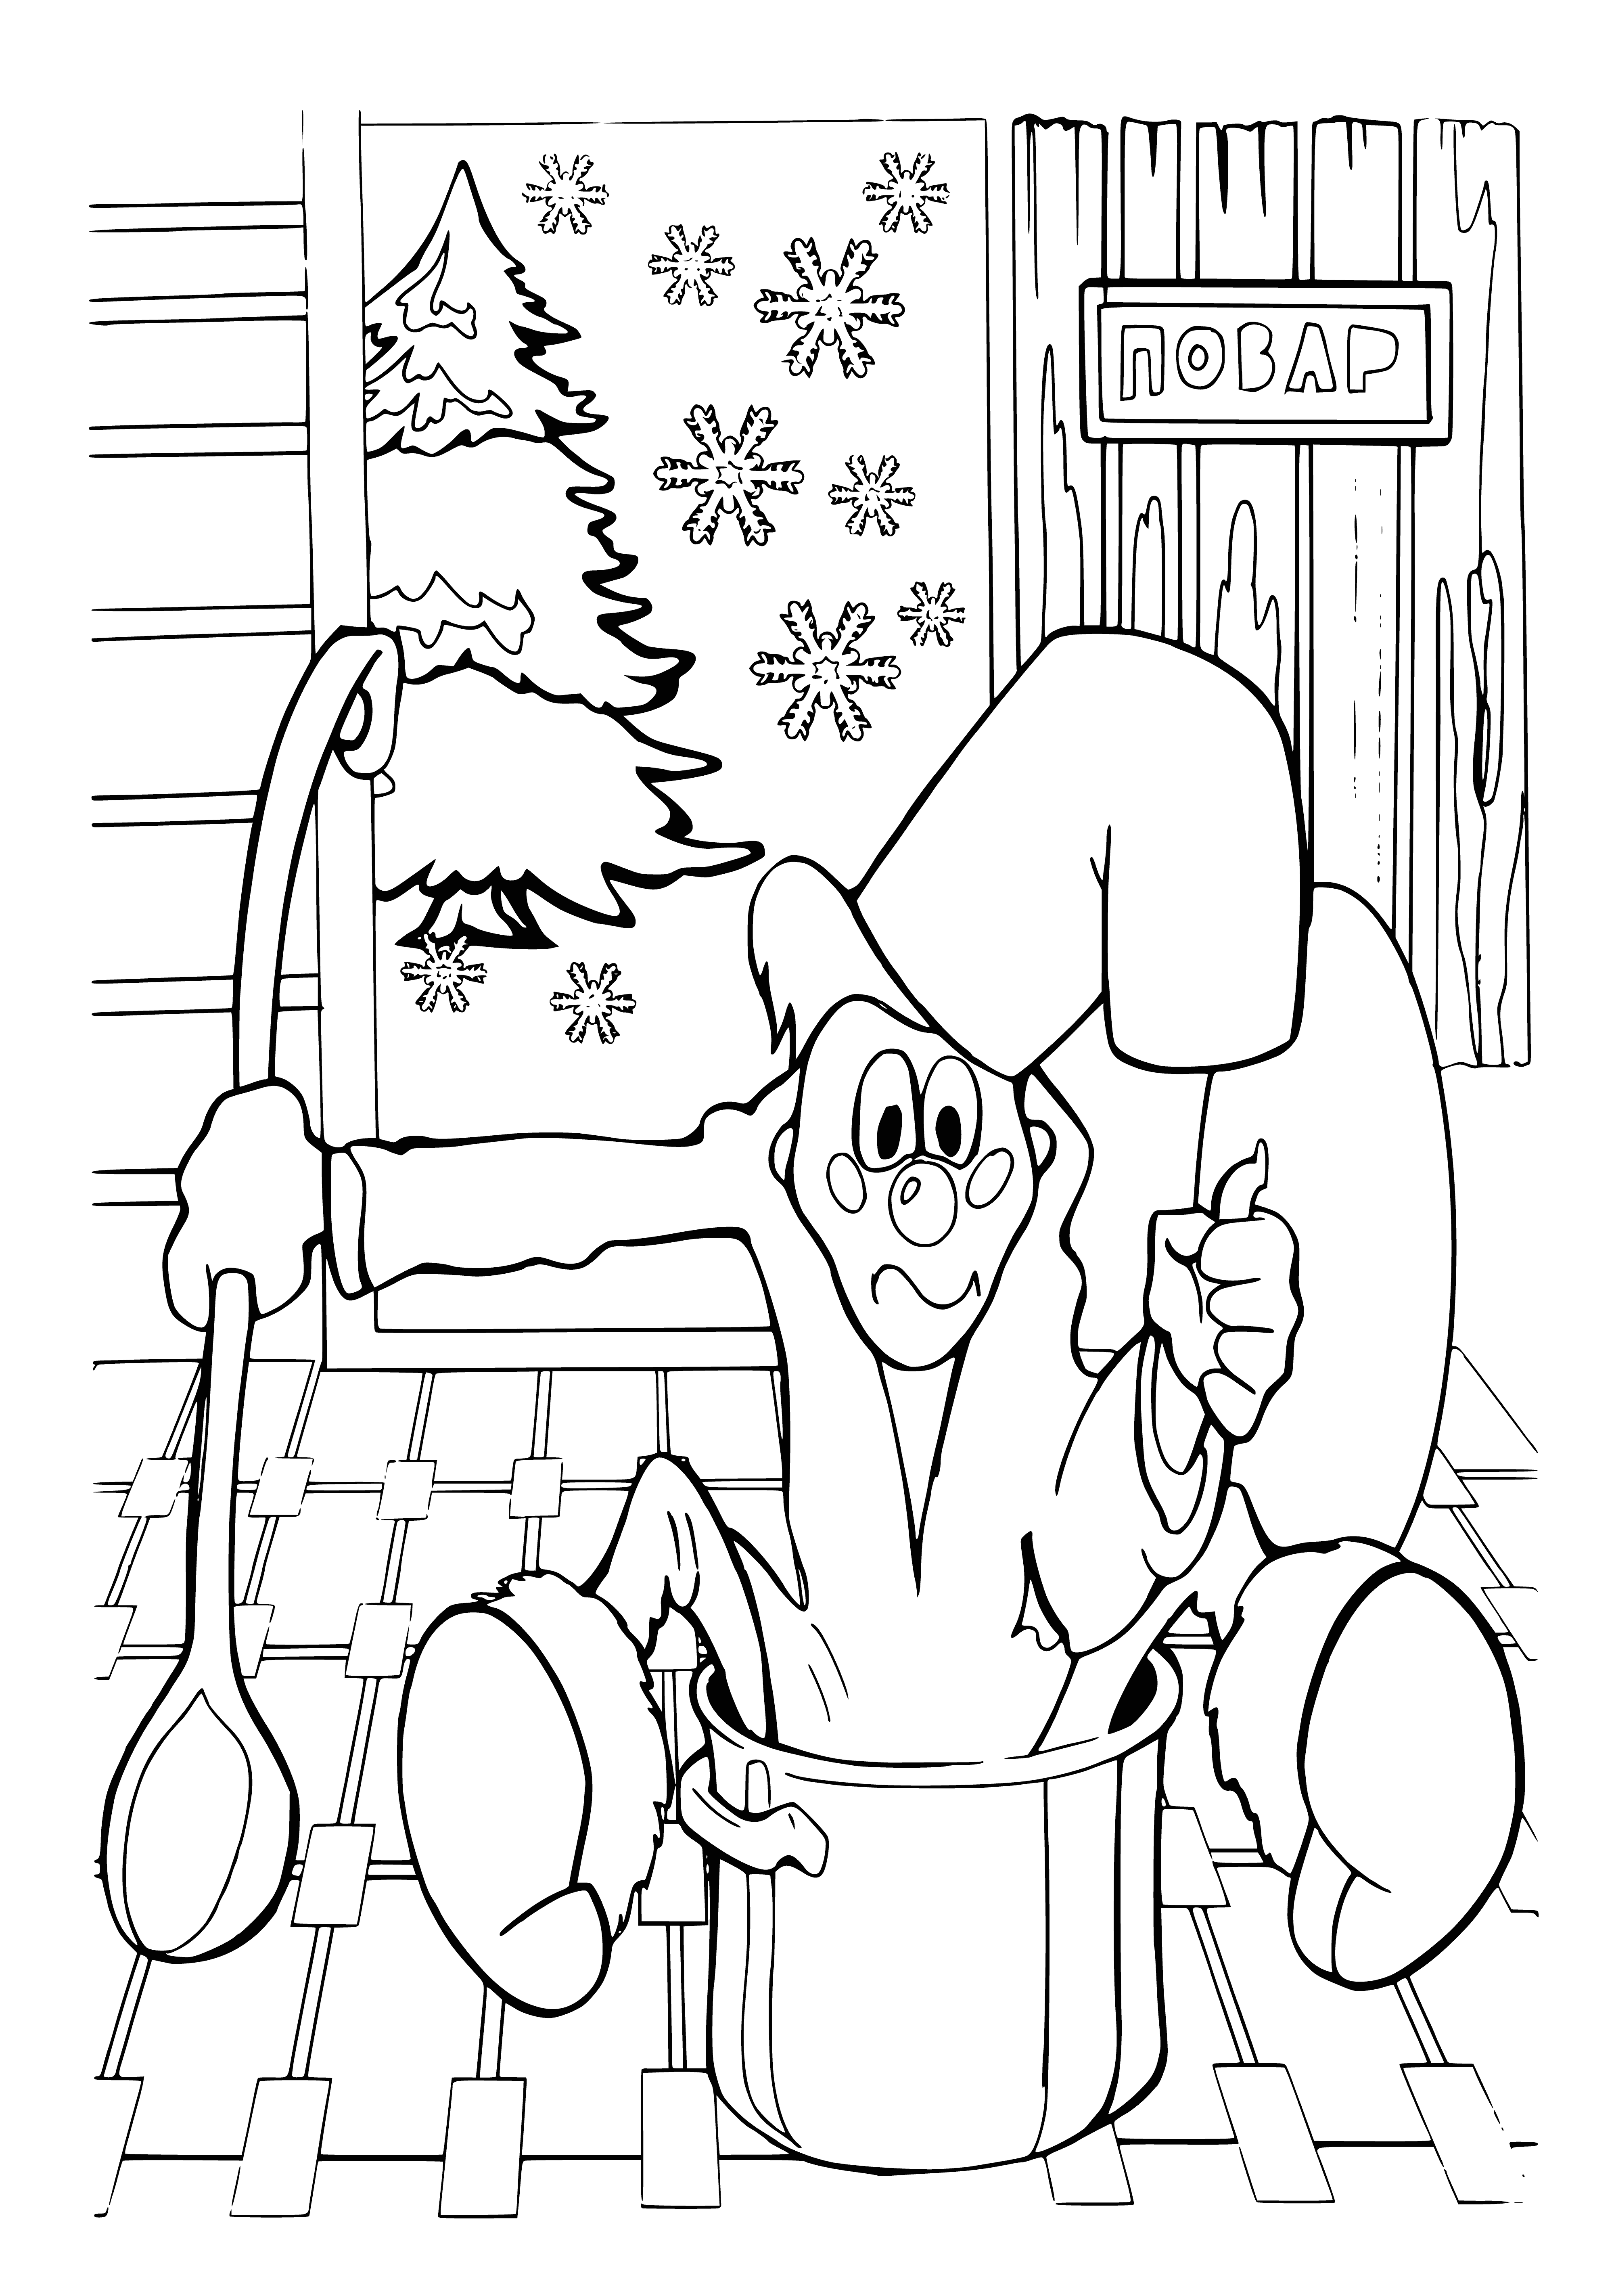 coloring page: Umkas are cooks who make scrumptious meals with minimal ingredients efficiently & organizationally, typically for a family/group.